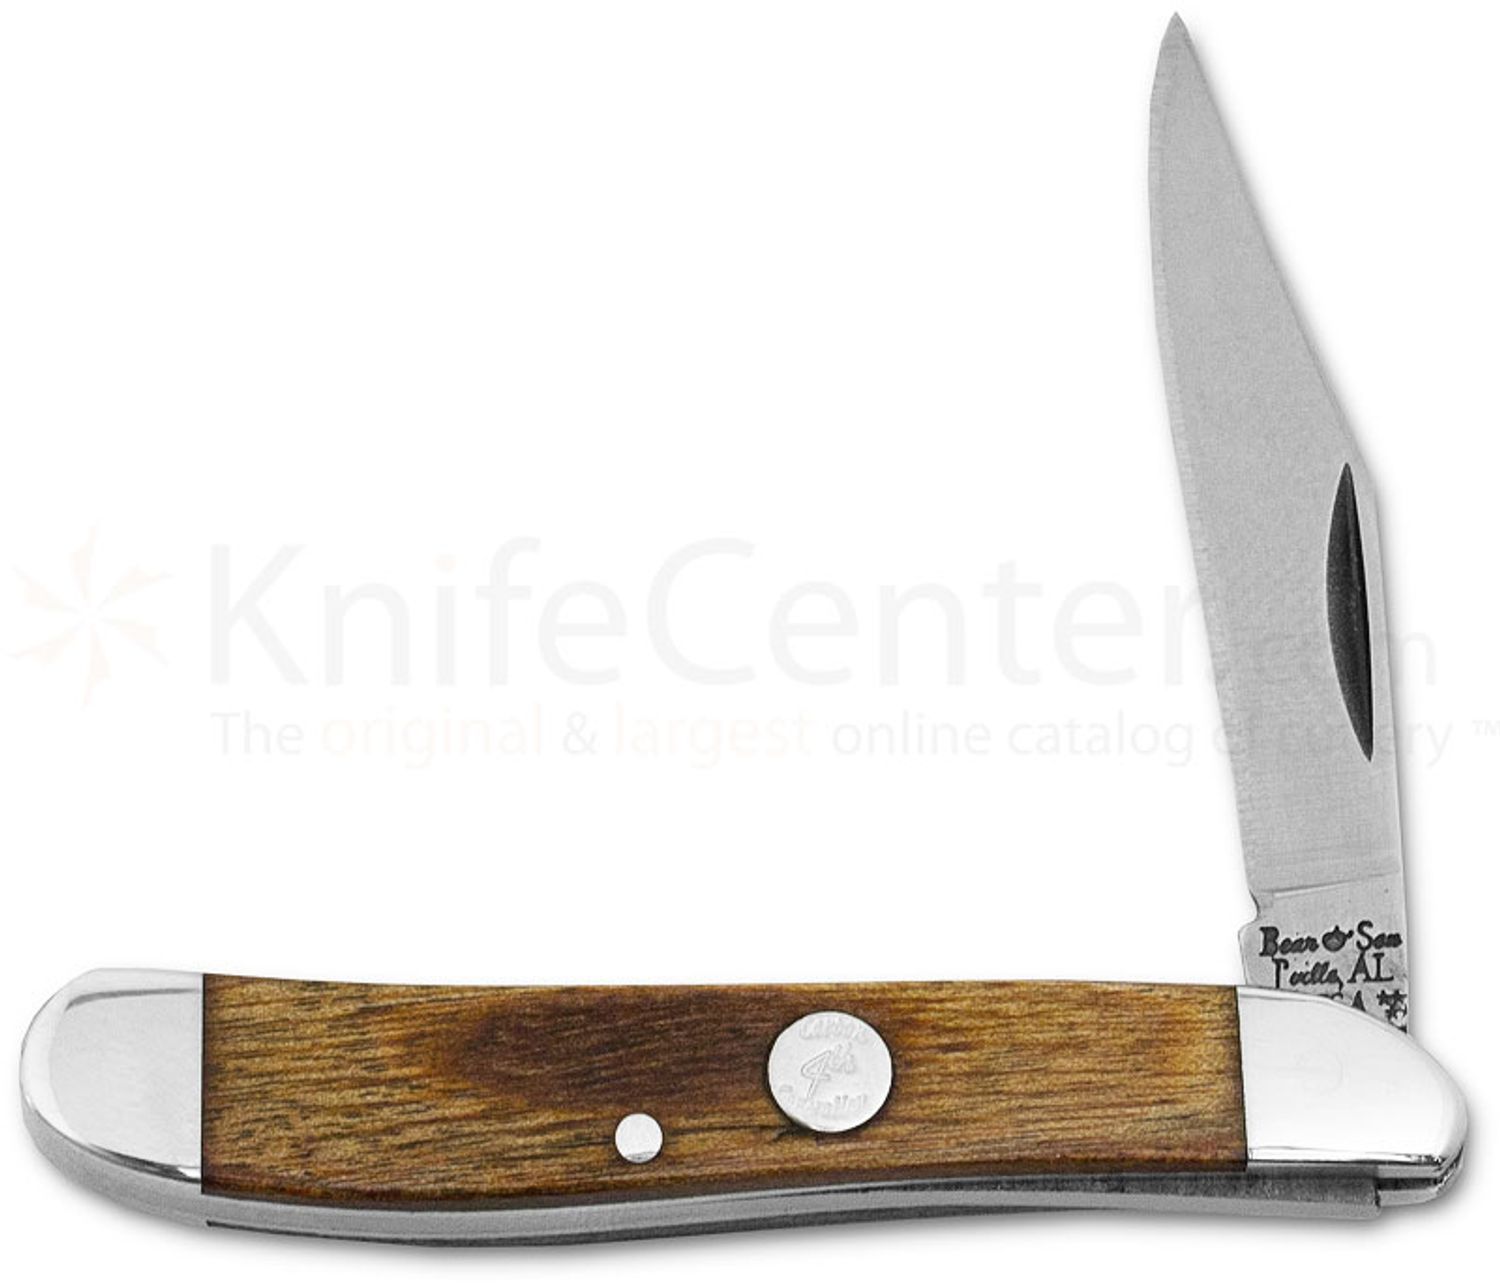 Bear & Son 3 7/8 Stag Delrin Large Stockman Knife SD47